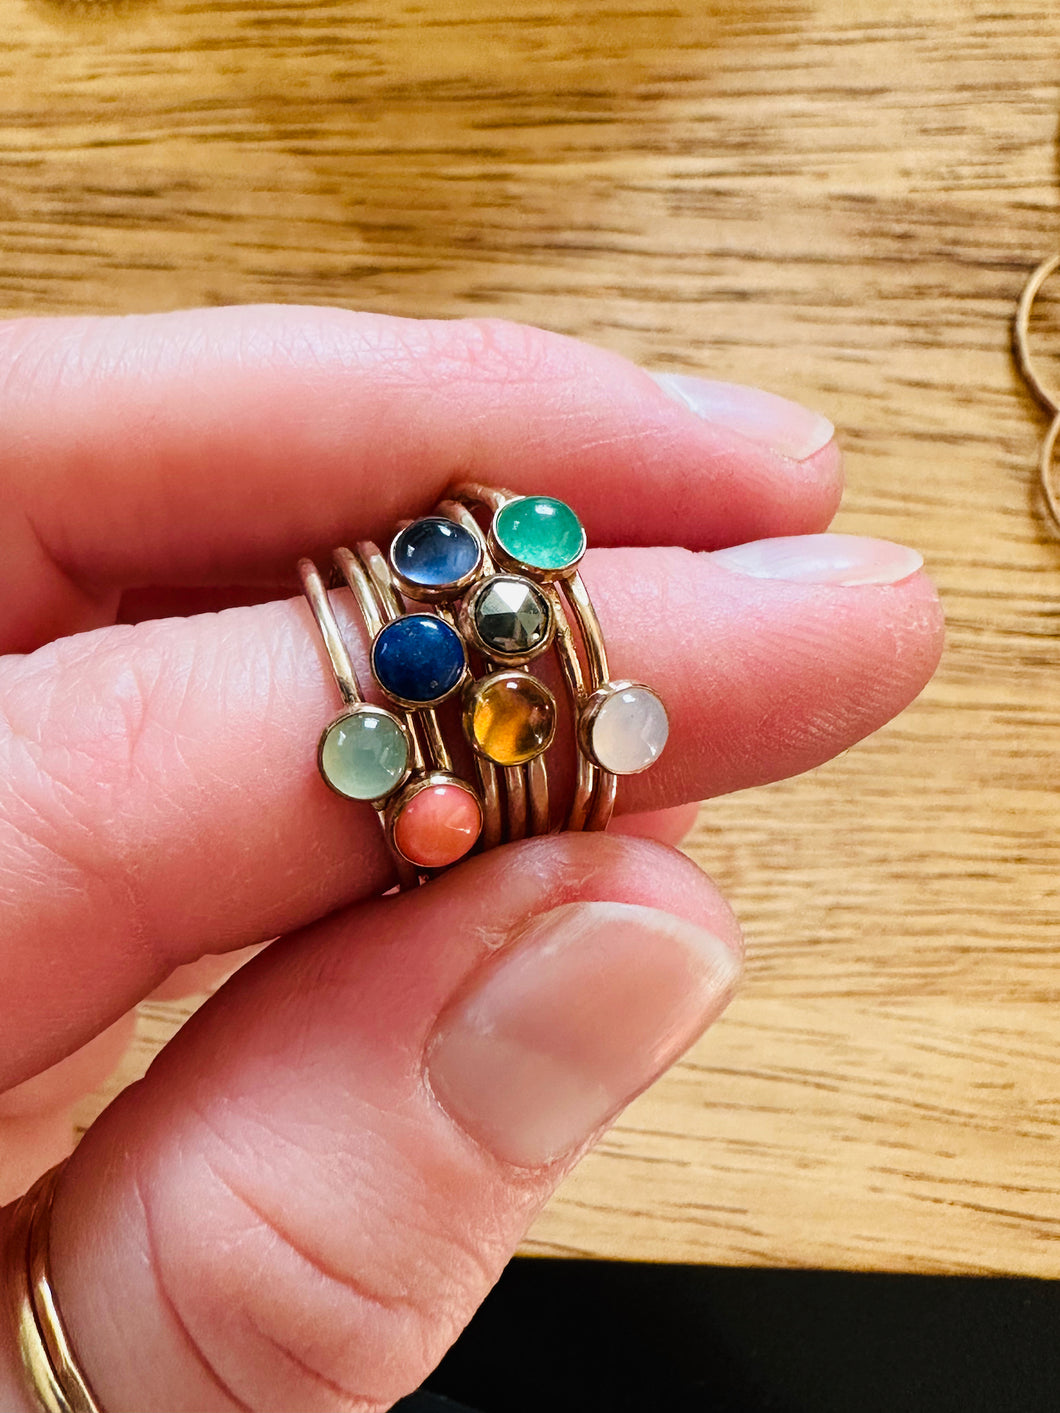 Group of Skinny Mini Jeweled Stackers 4mm Gemstone Options. Aqua Chalcedony, Pink Coral, Lapis, Iolite, Citrine, Rose Cut Pyrite, Adventurine & Moonstone 14k Gold Fill Bands.